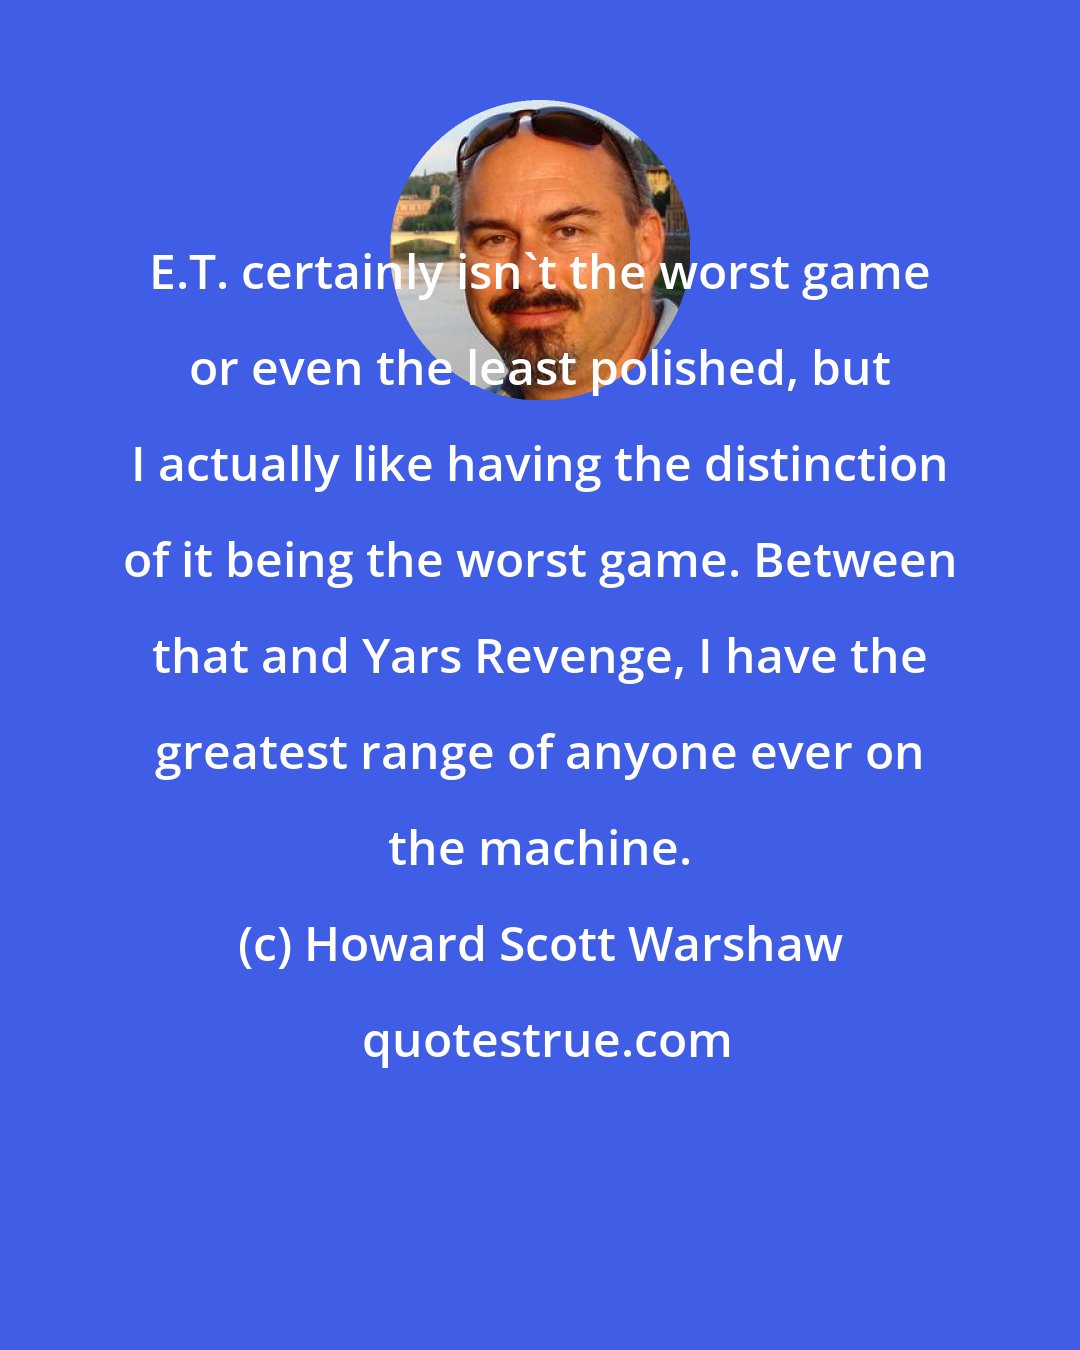 Howard Scott Warshaw: E.T. certainly isn't the worst game or even the least polished, but I actually like having the distinction of it being the worst game. Between that and Yars Revenge, I have the greatest range of anyone ever on the machine.